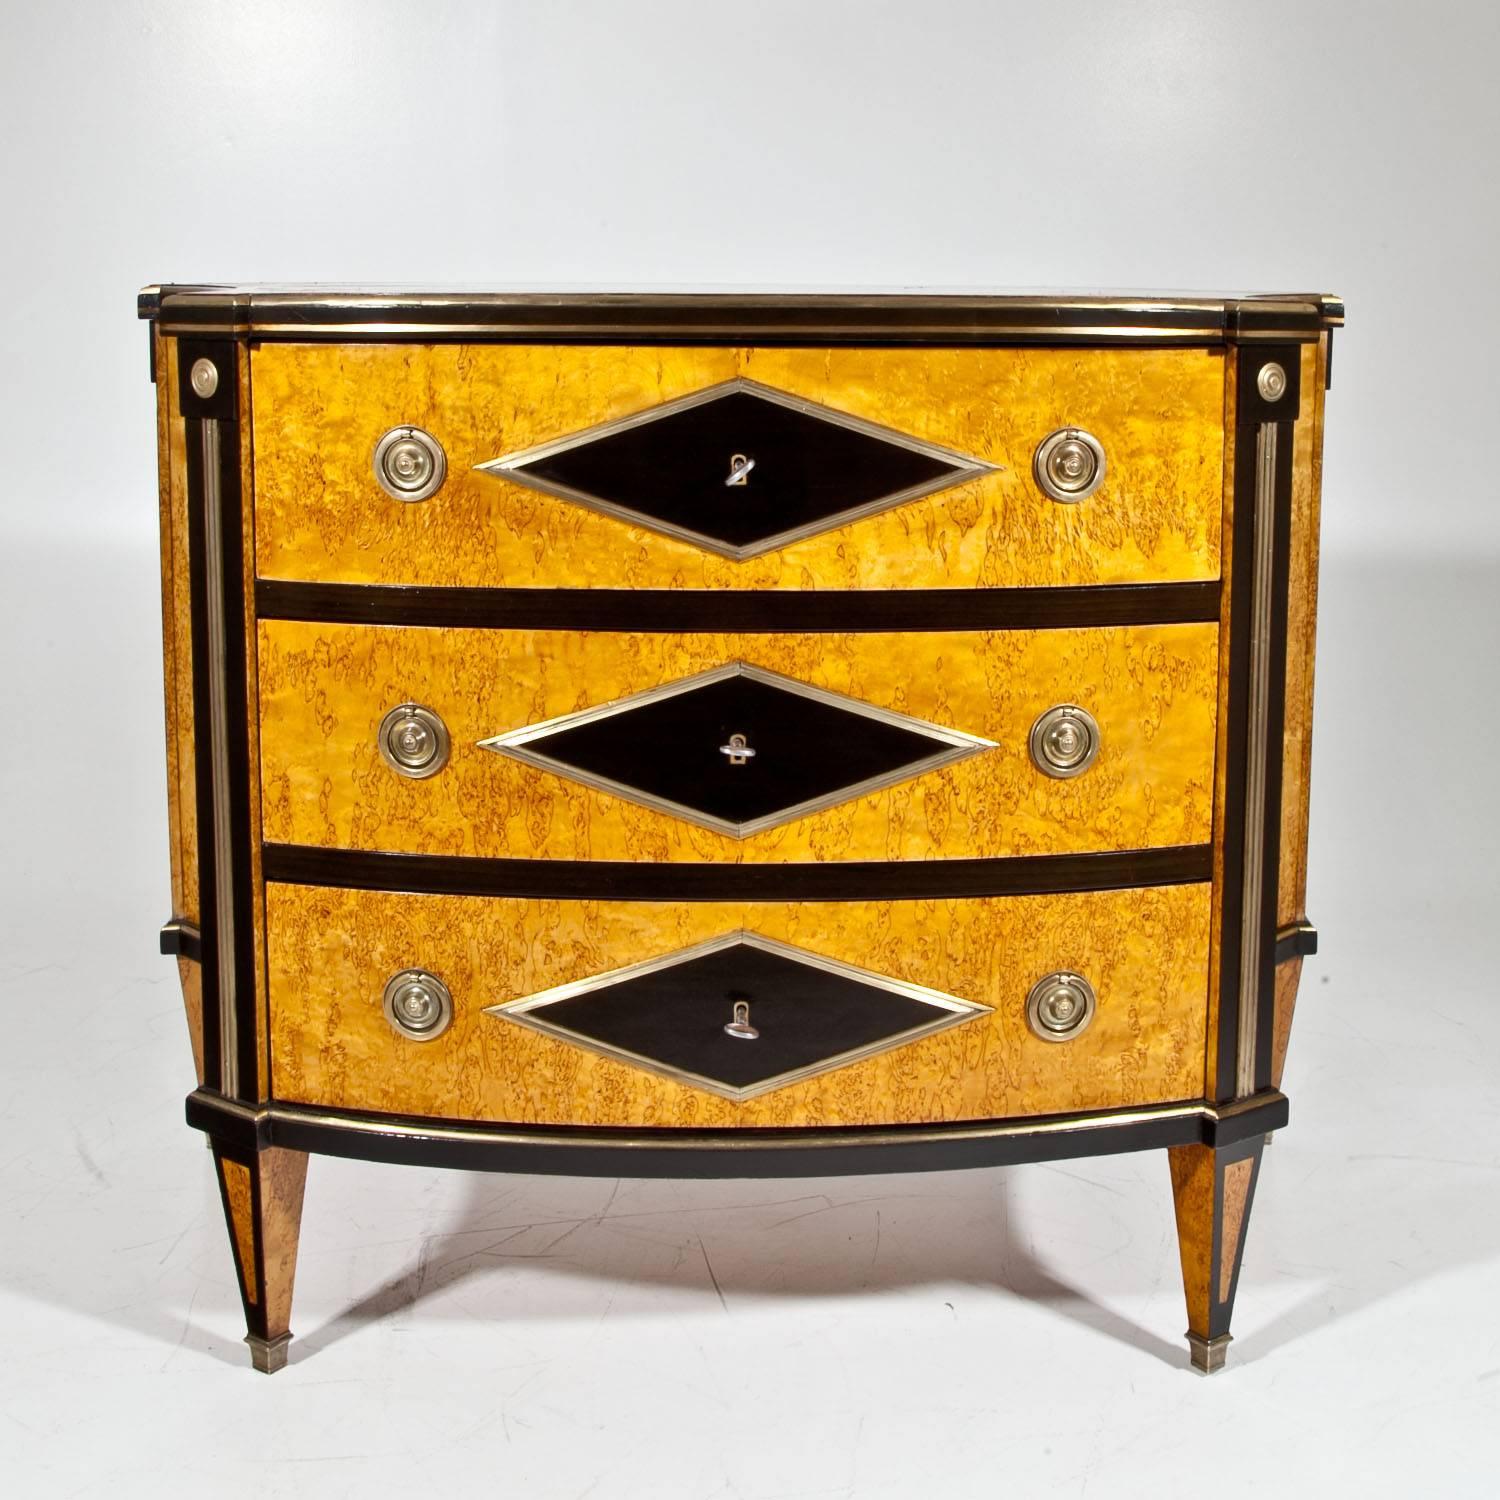 Chests of drawers of the second half of the 20th century, in the style of the 1800s. The Russian-style chests have three drawers, a trapezoidal corpus with concave sides and ebonized diamond-shaped details with brass framing. The veneer is Karelian